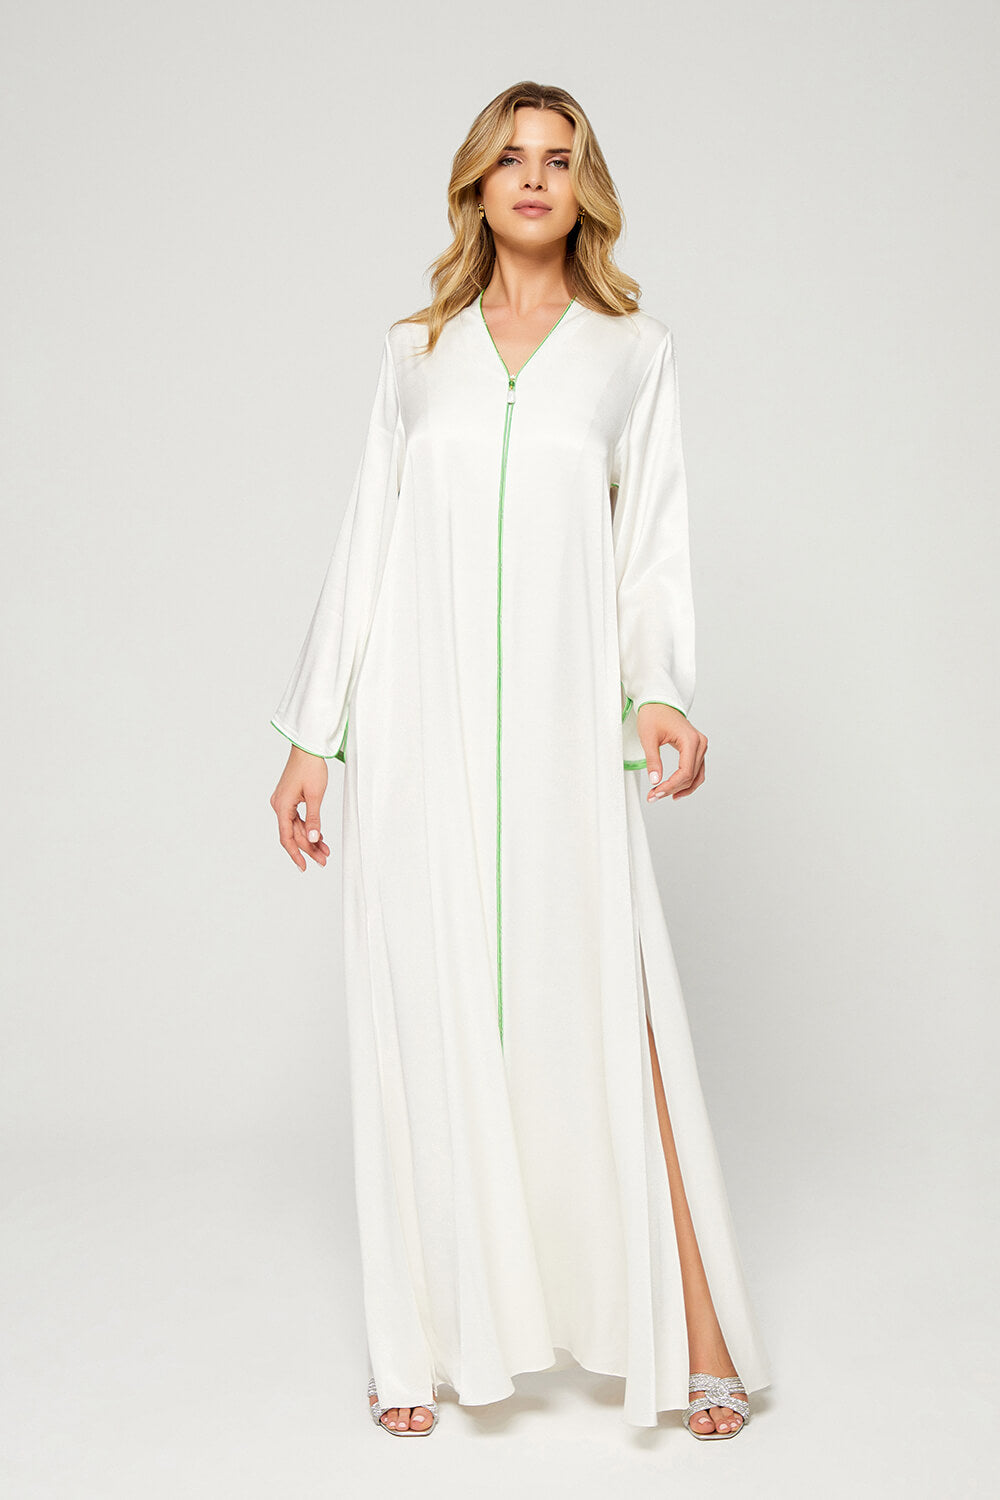 Brusa - Rayon Long Zippered Dress -Off White with Meadow Green Tape Details